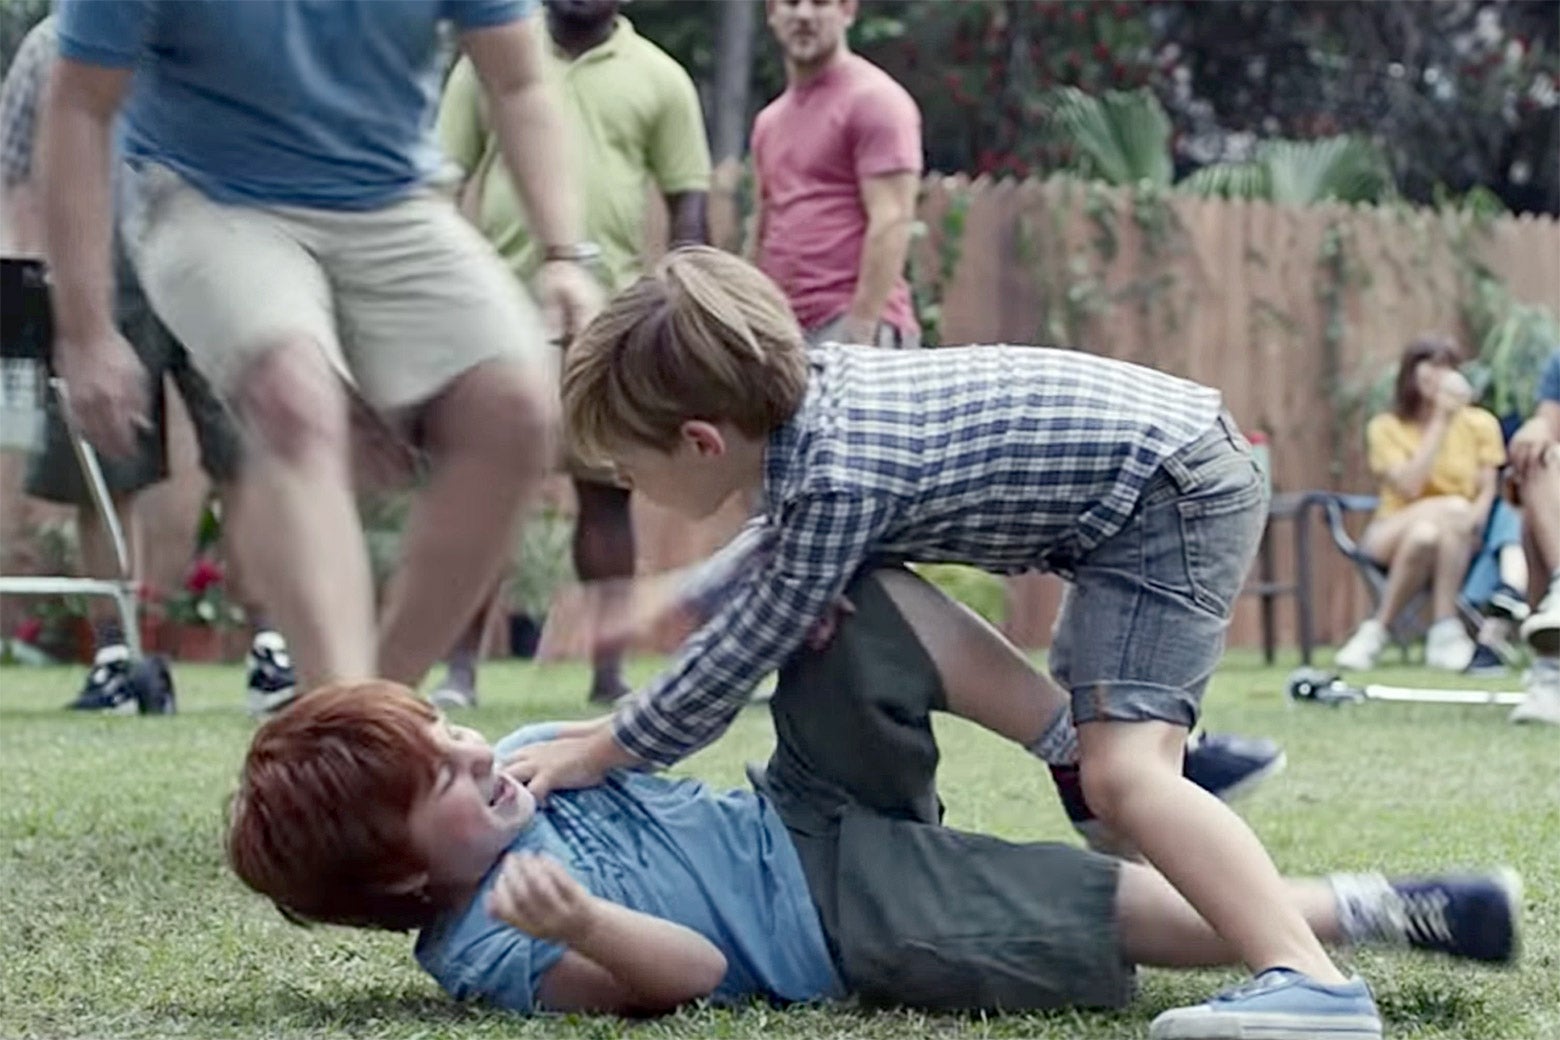 Boys fighting in a Gillette ad